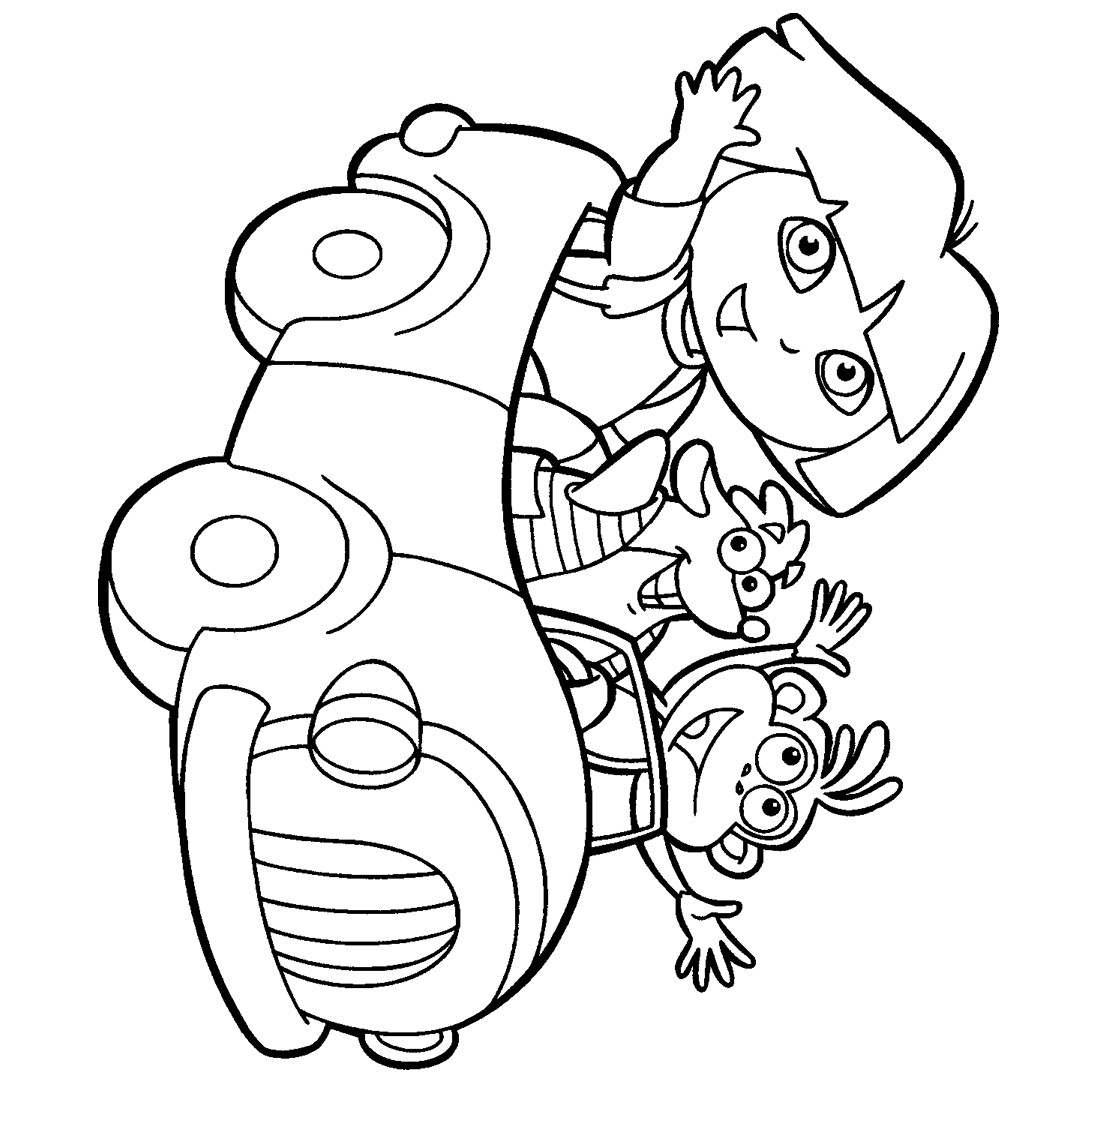 Kids Coloring Book
 Printable coloring pages for kids